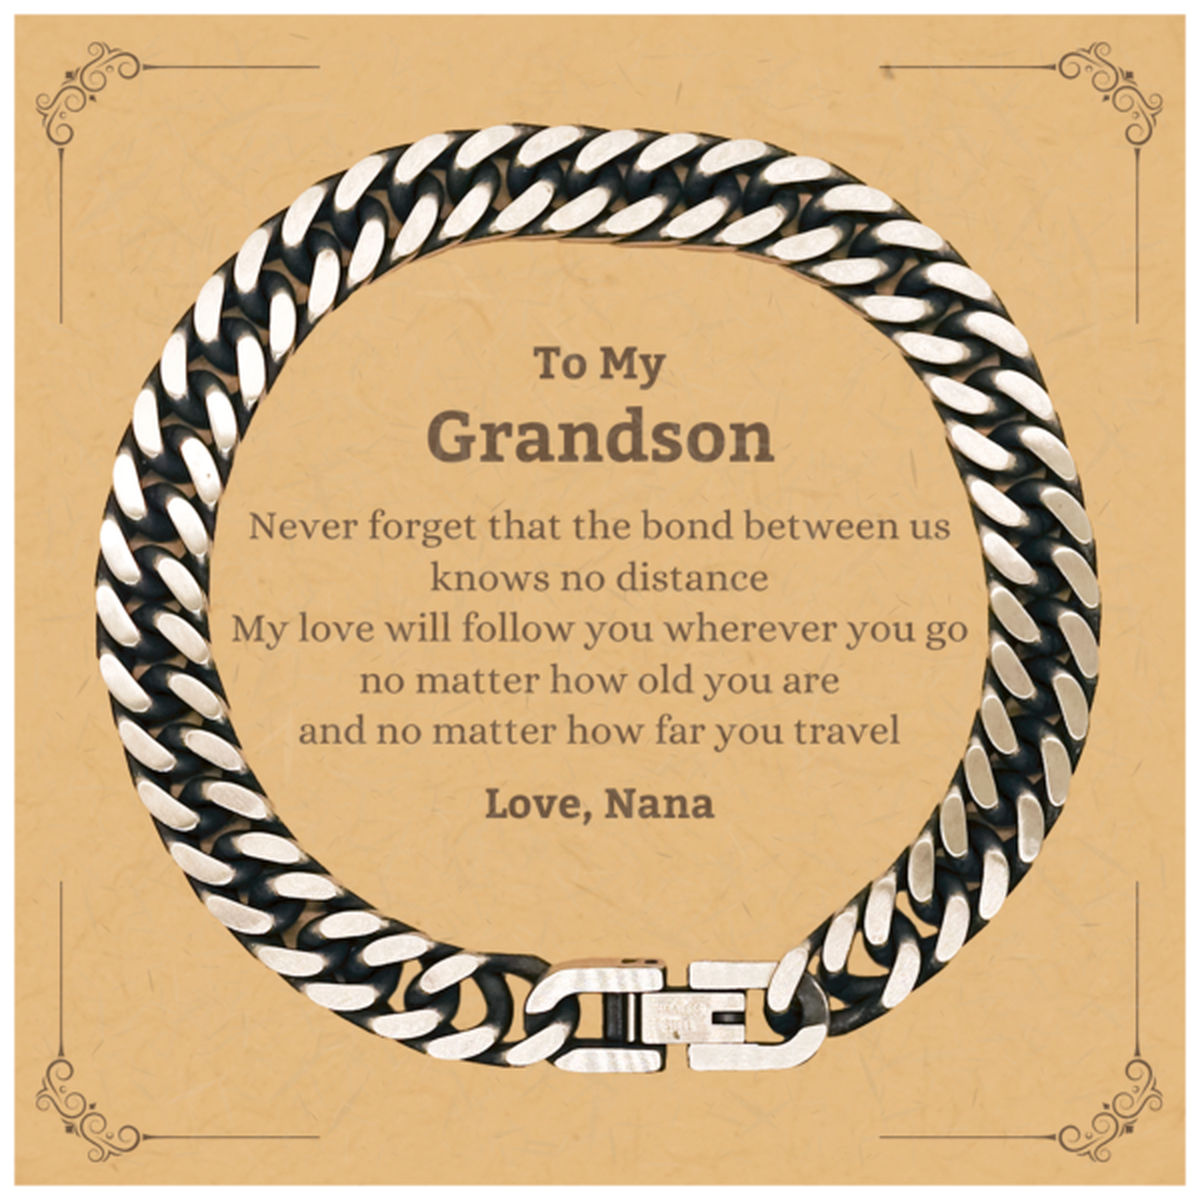 Grandson Birthday Gifts from Nana, Adjustable Cuban Link Chain Bracelet for Grandson Christmas Graduation Unique Gifts Grandson Never forget that the bond between us knows no distance. Love, Nana